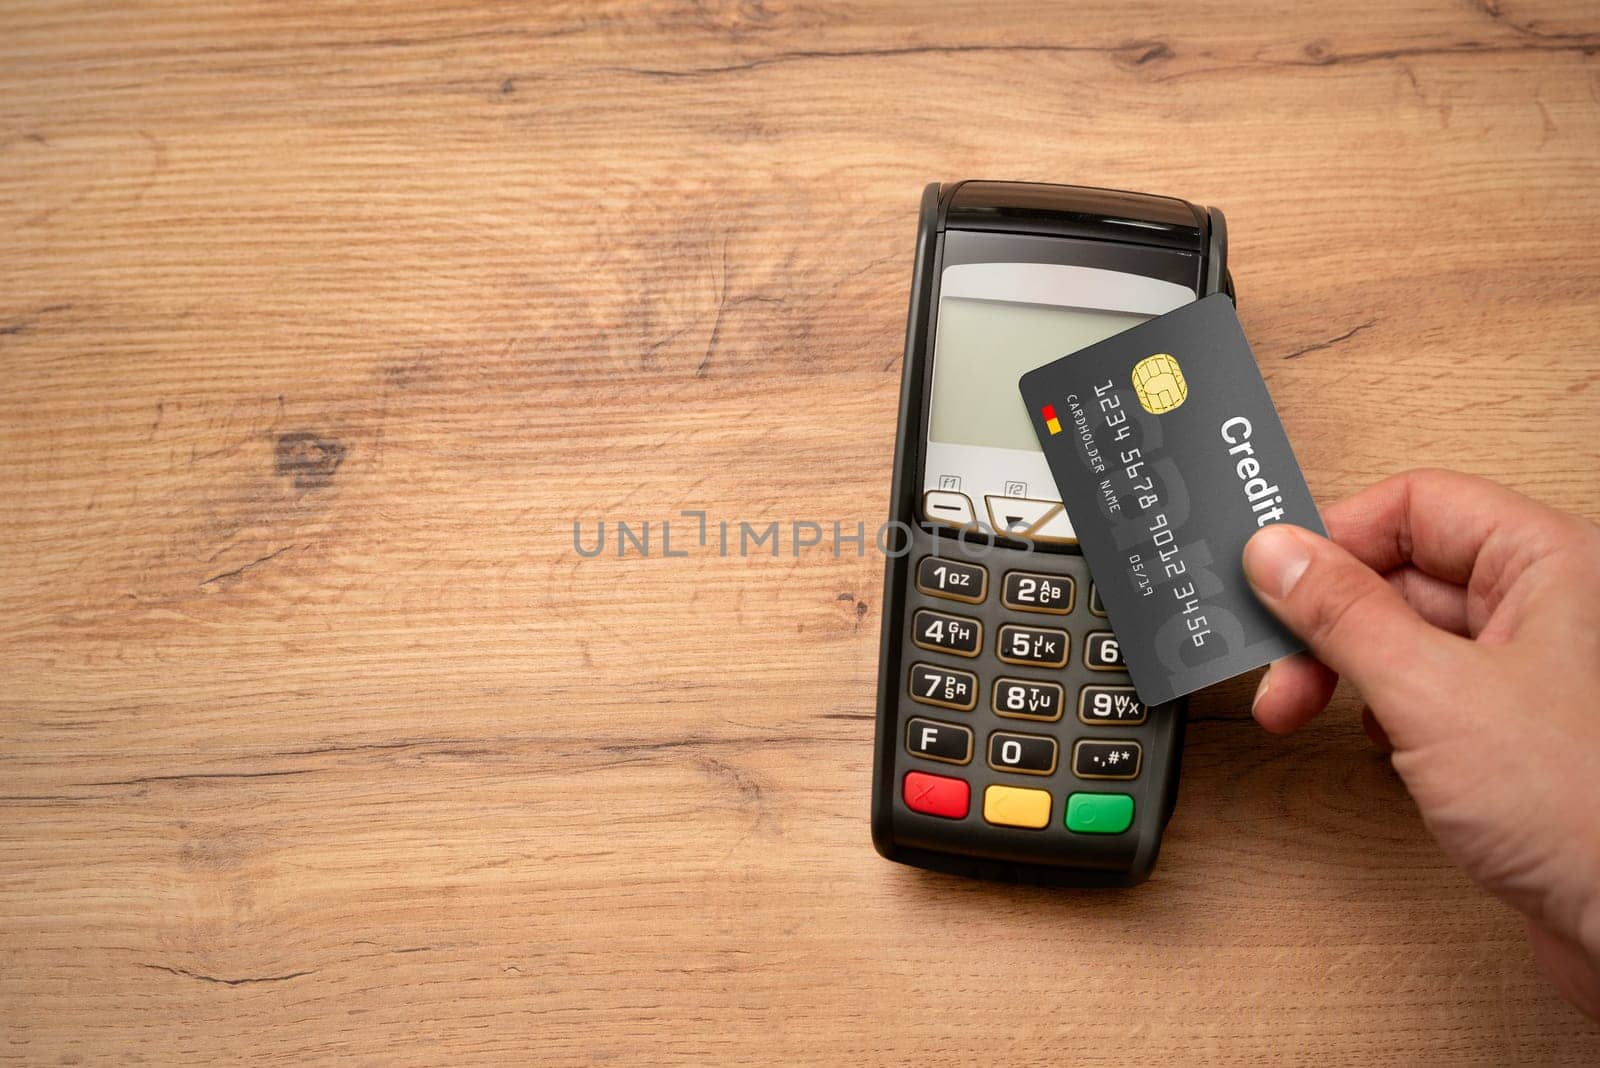 Pos terminal with credit card. Card payment method by simpson33